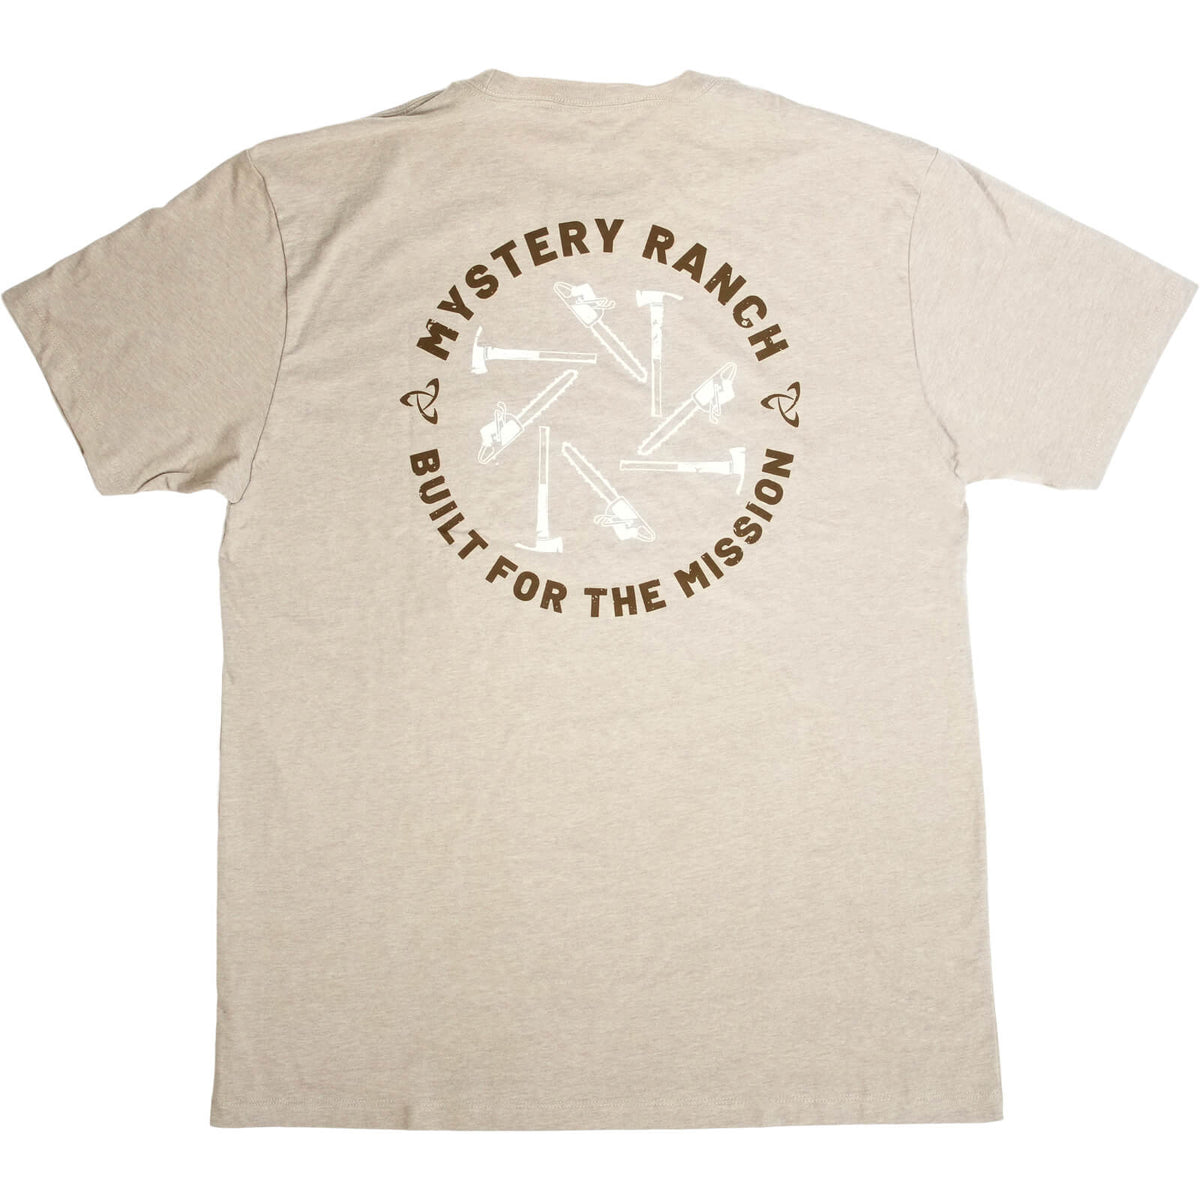 Mystery Ranch Tools In the Round T-Shirt